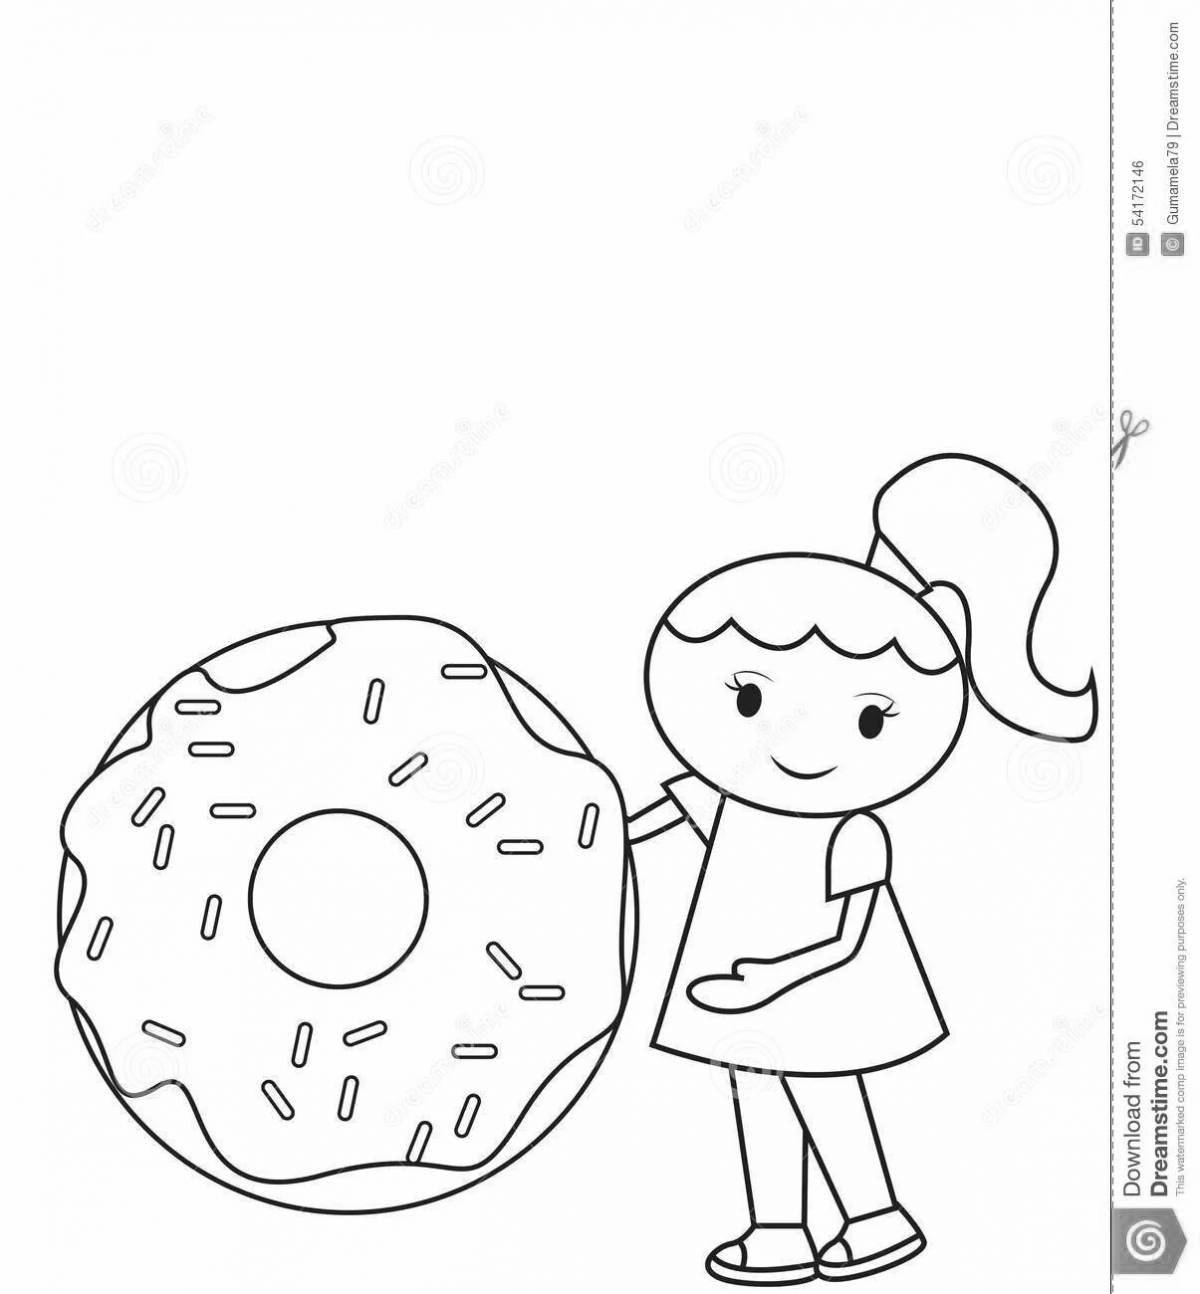 Playful donut coloring page for girls